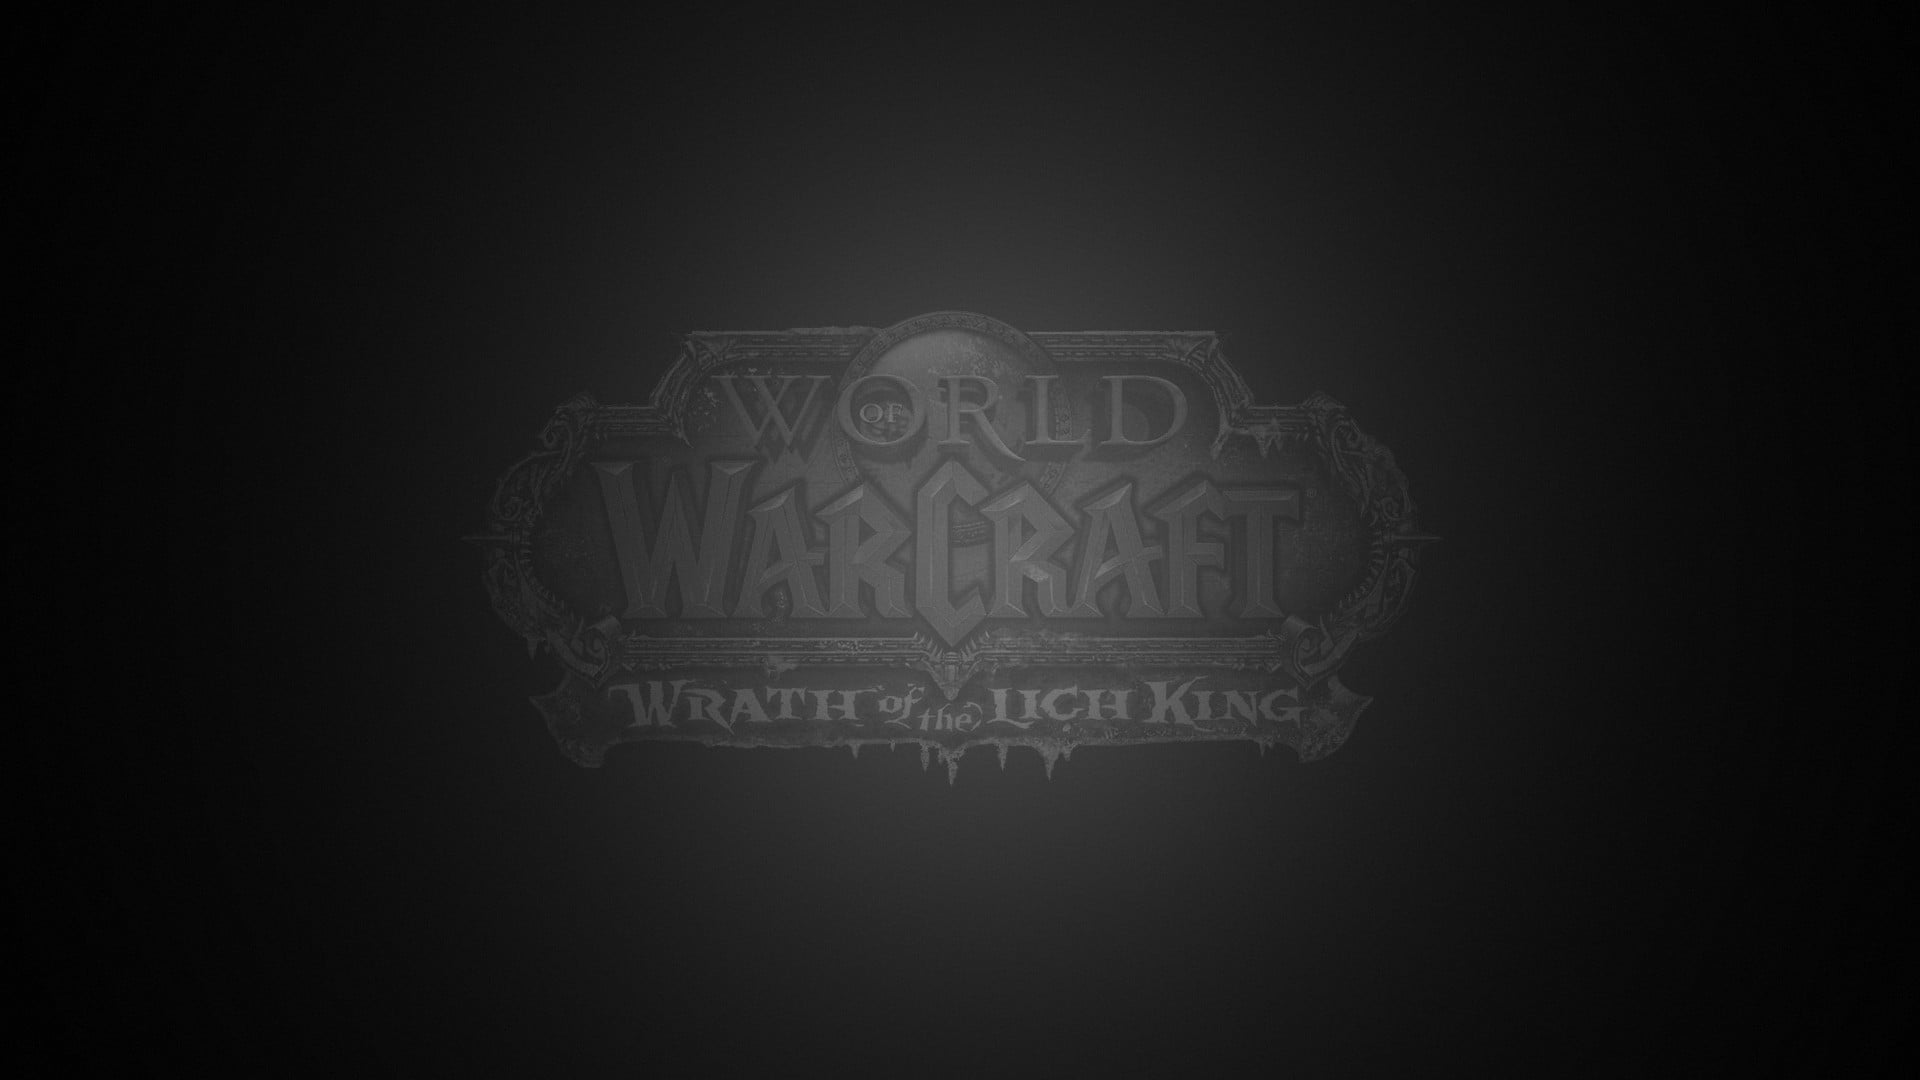 World of Warcraft, World of Warcraft: Wrath of the Lich King